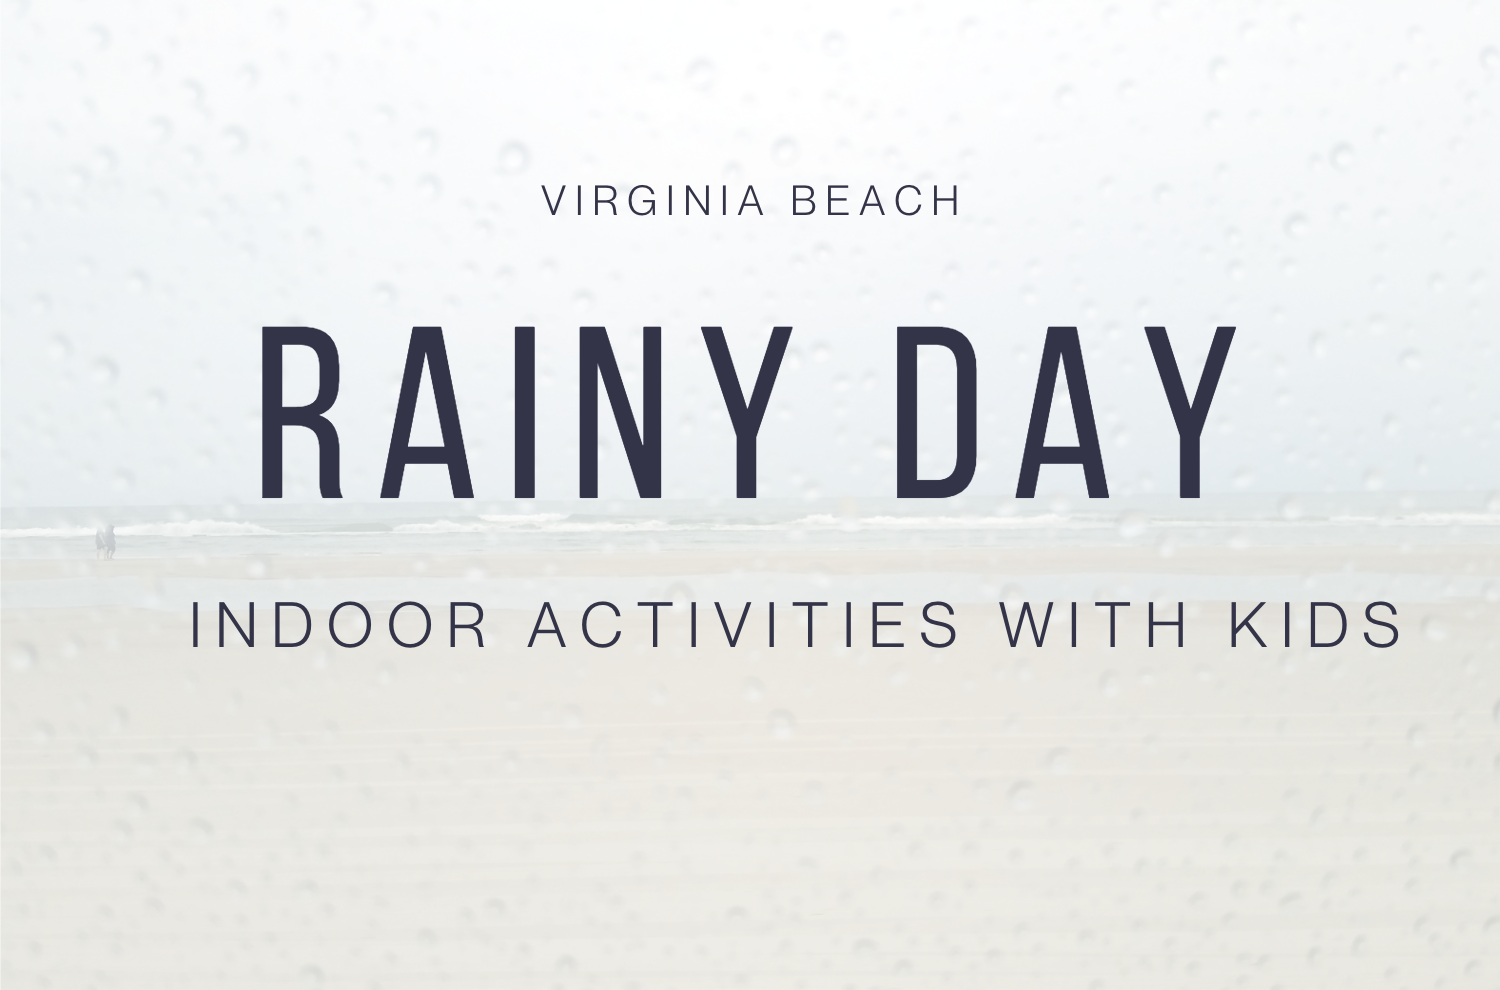 Indoor things to do with kinds in Virginia beach on a rainy day